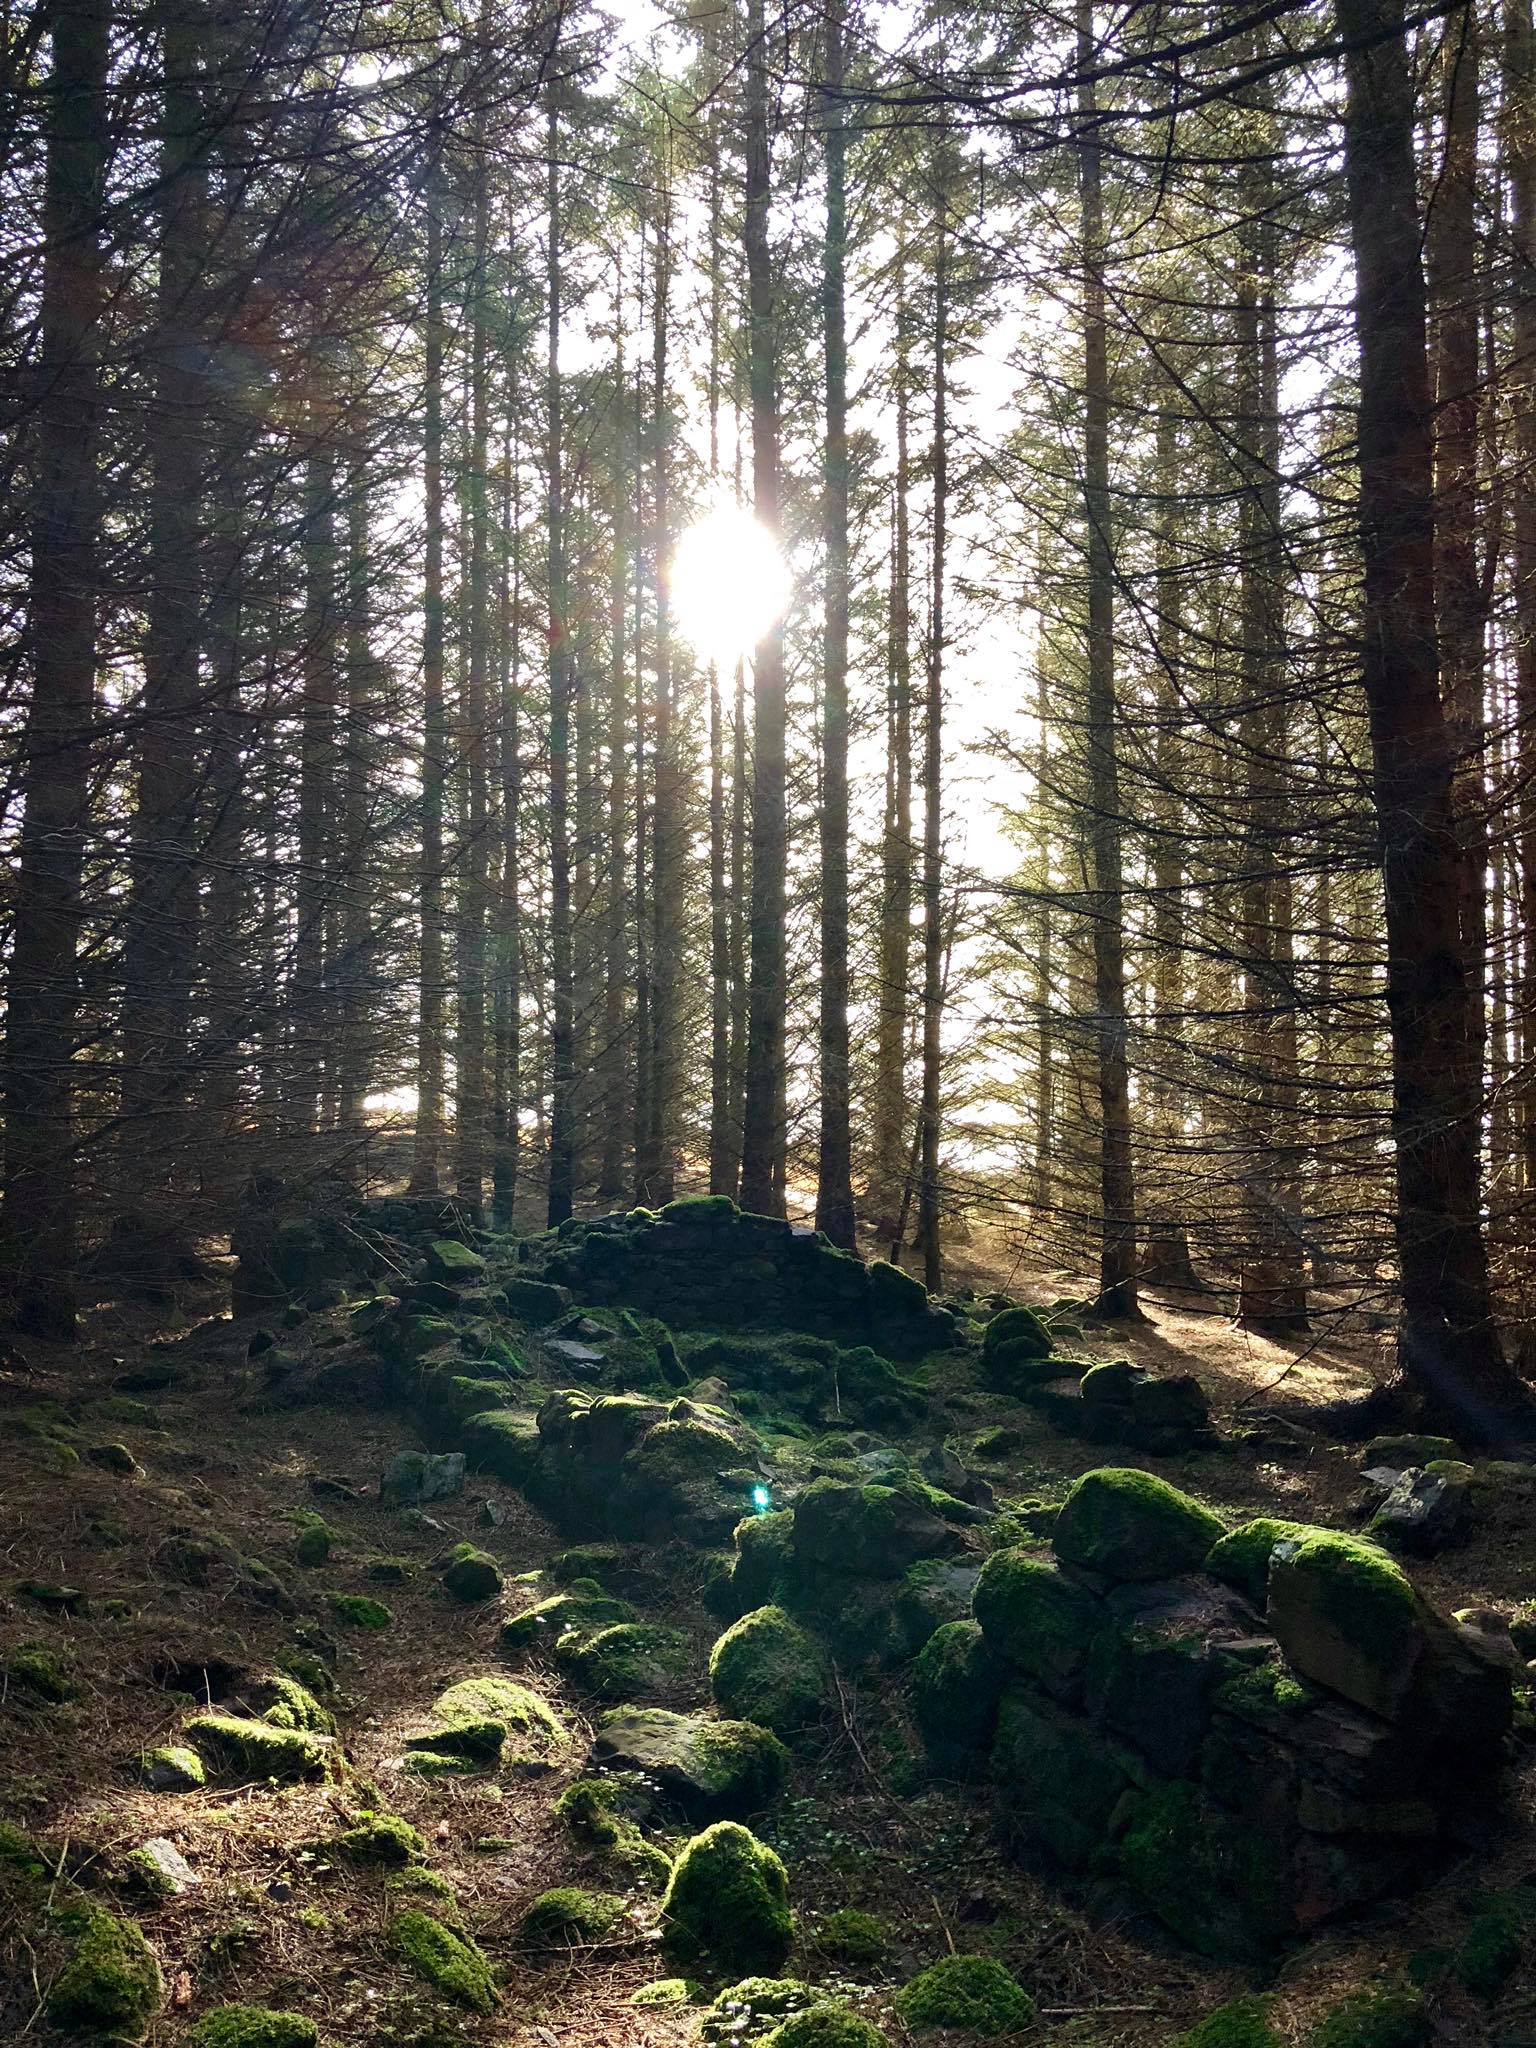 Scotland Revisited: Image of a forest in Scotland.